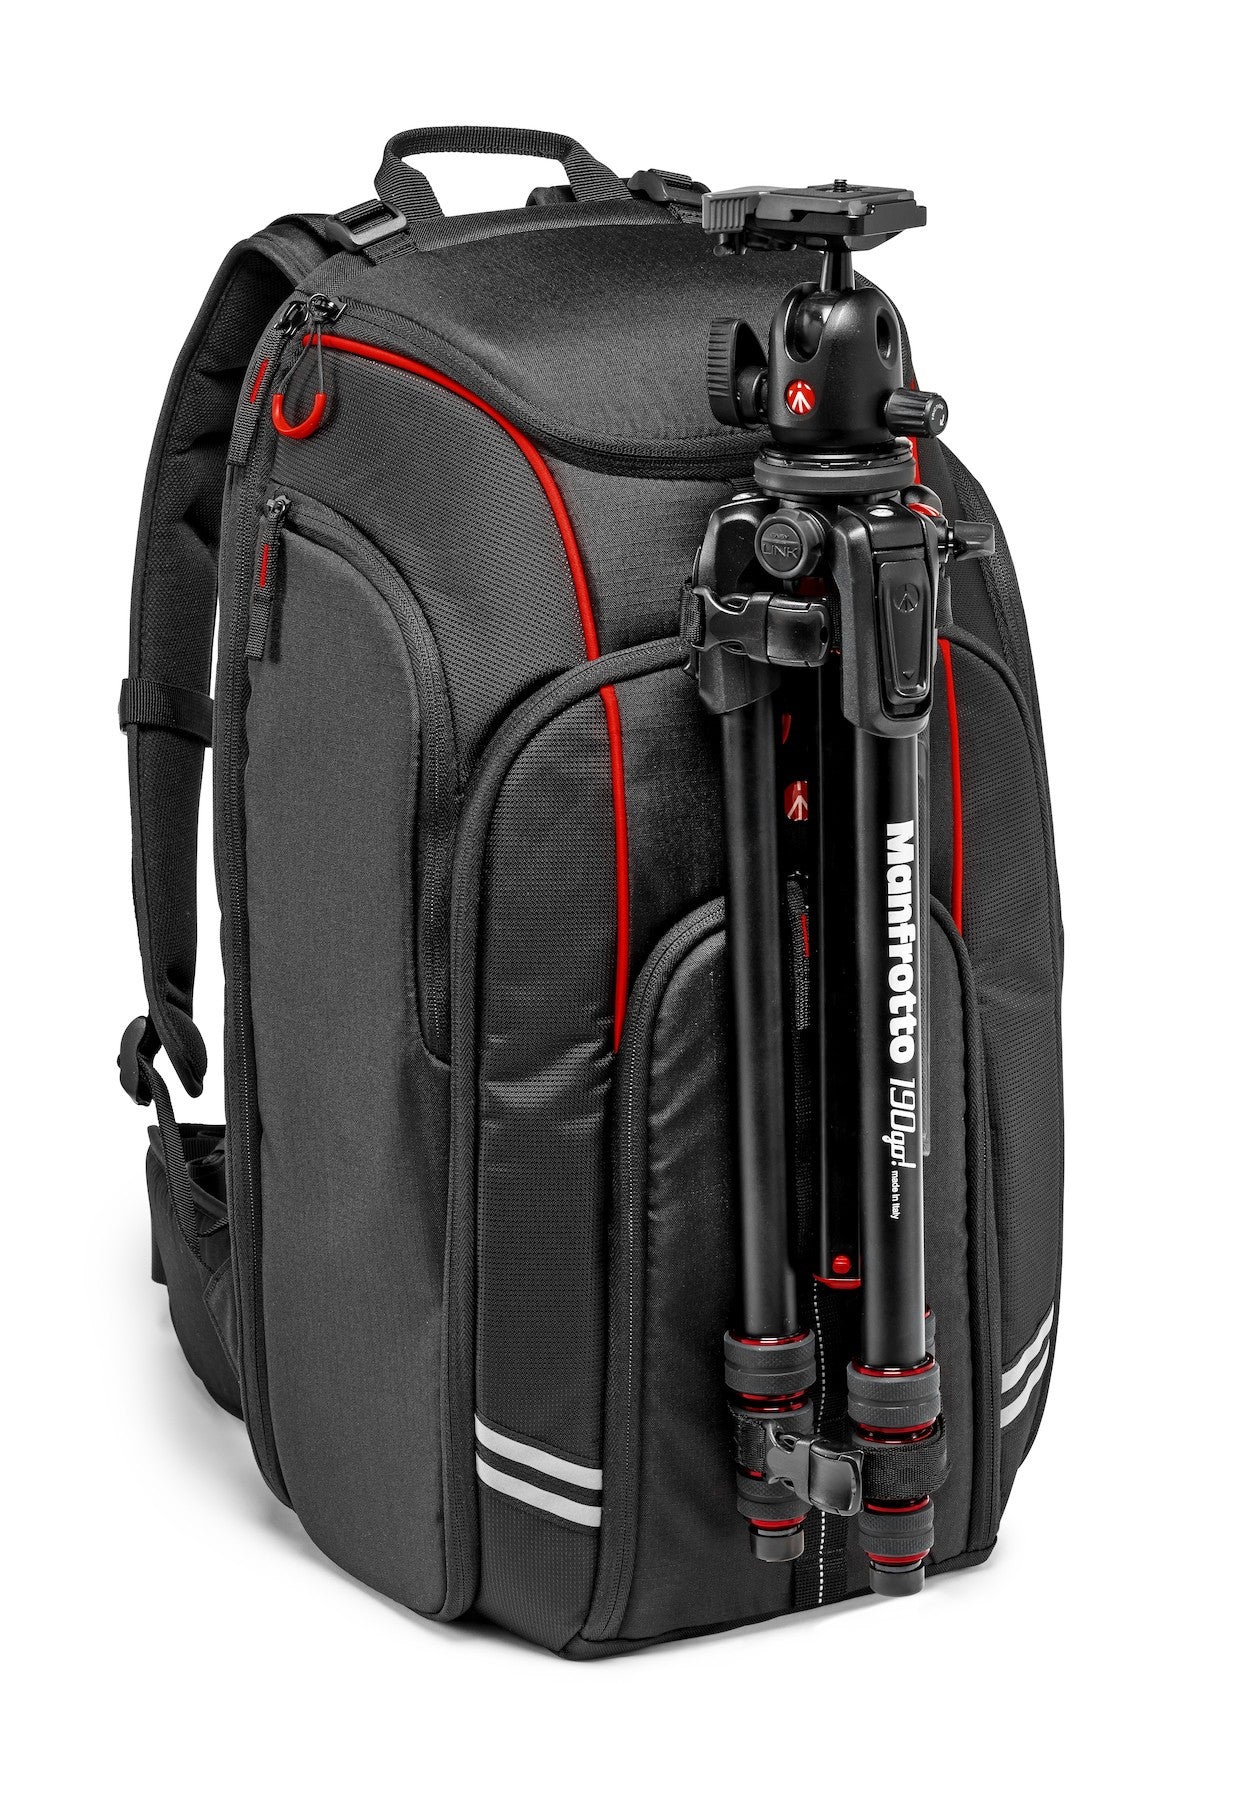 Manfrotto MB BP-D1 Drone Backpack, bags backpacks, Manfrotto - Pictureline  - 3